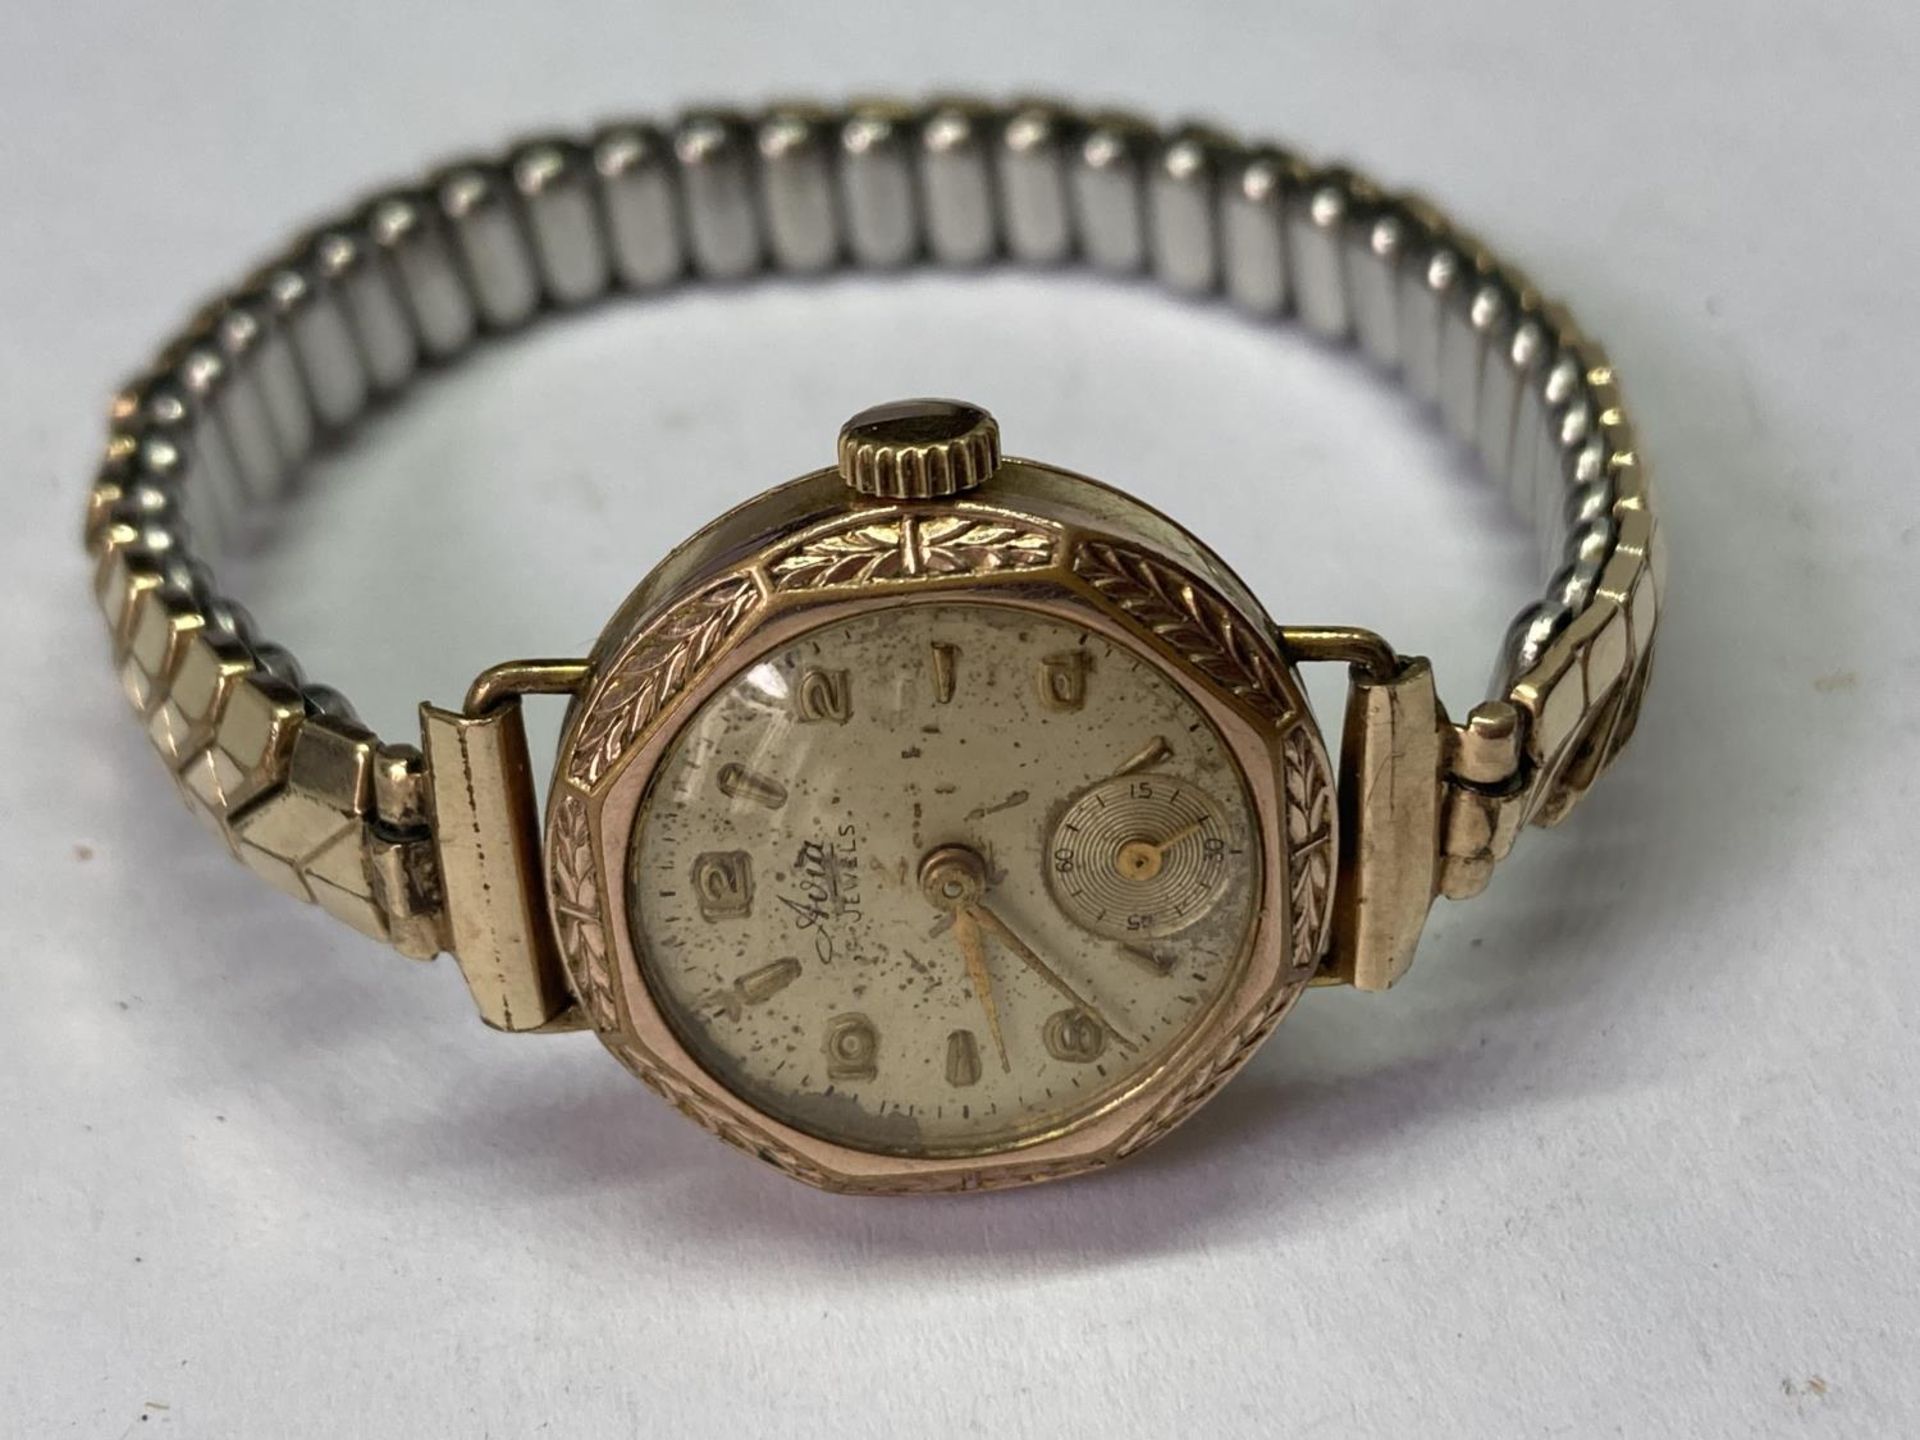 A VINTAGE AVIA GOLD PLATED WRIST WATCH - Image 2 of 3